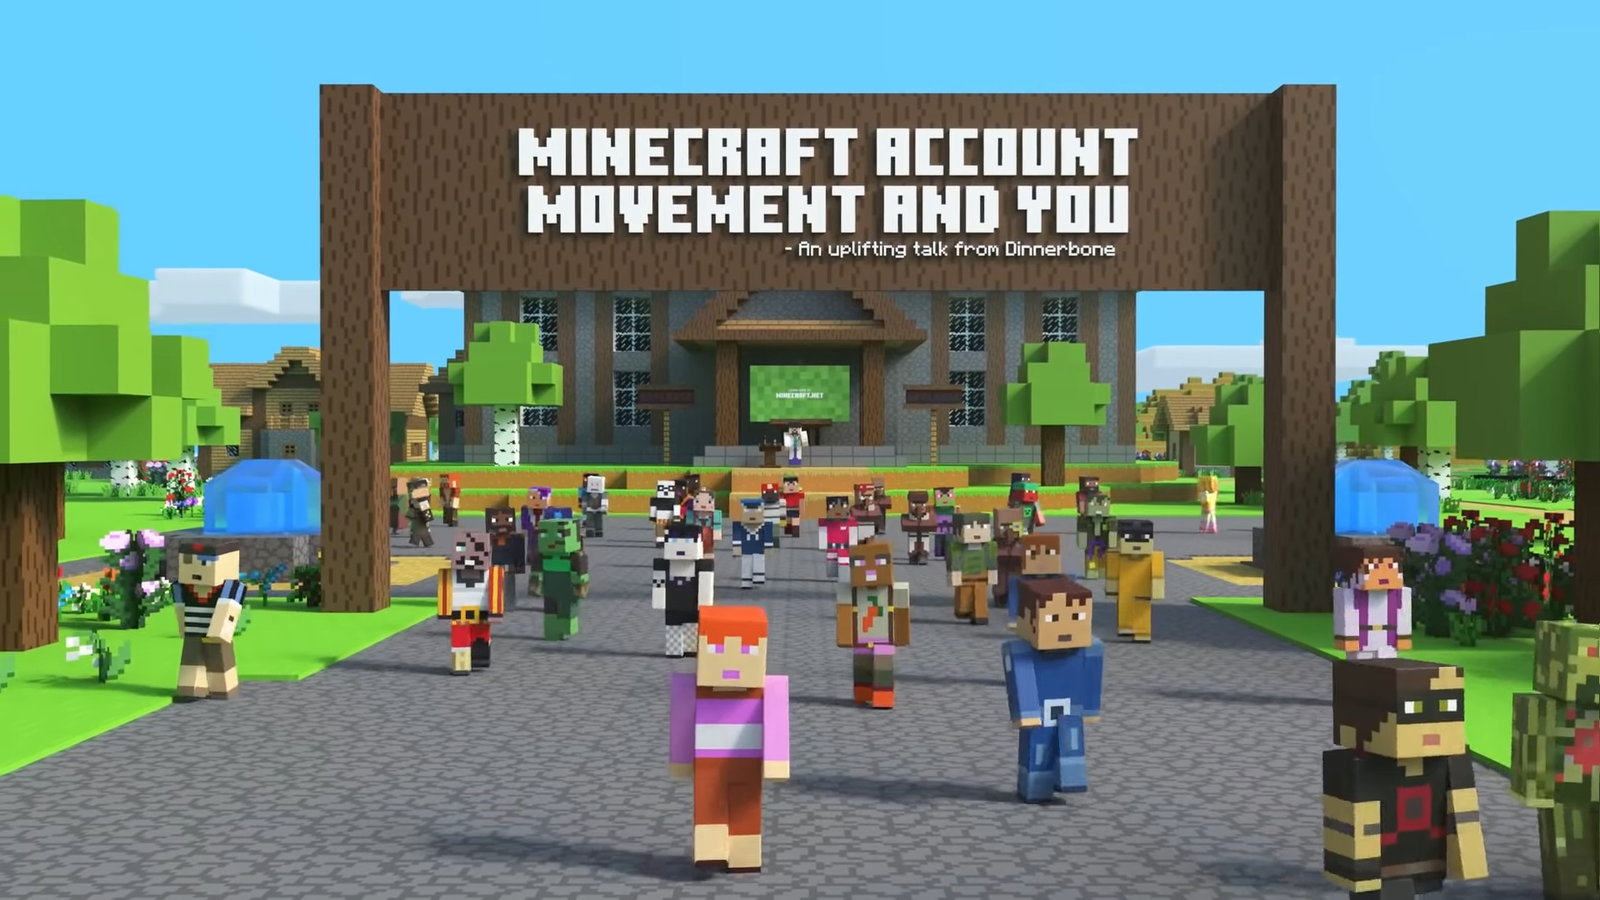 Minecraft requires a Microsoft Account from March 2022 onward - gHacks Tech  News